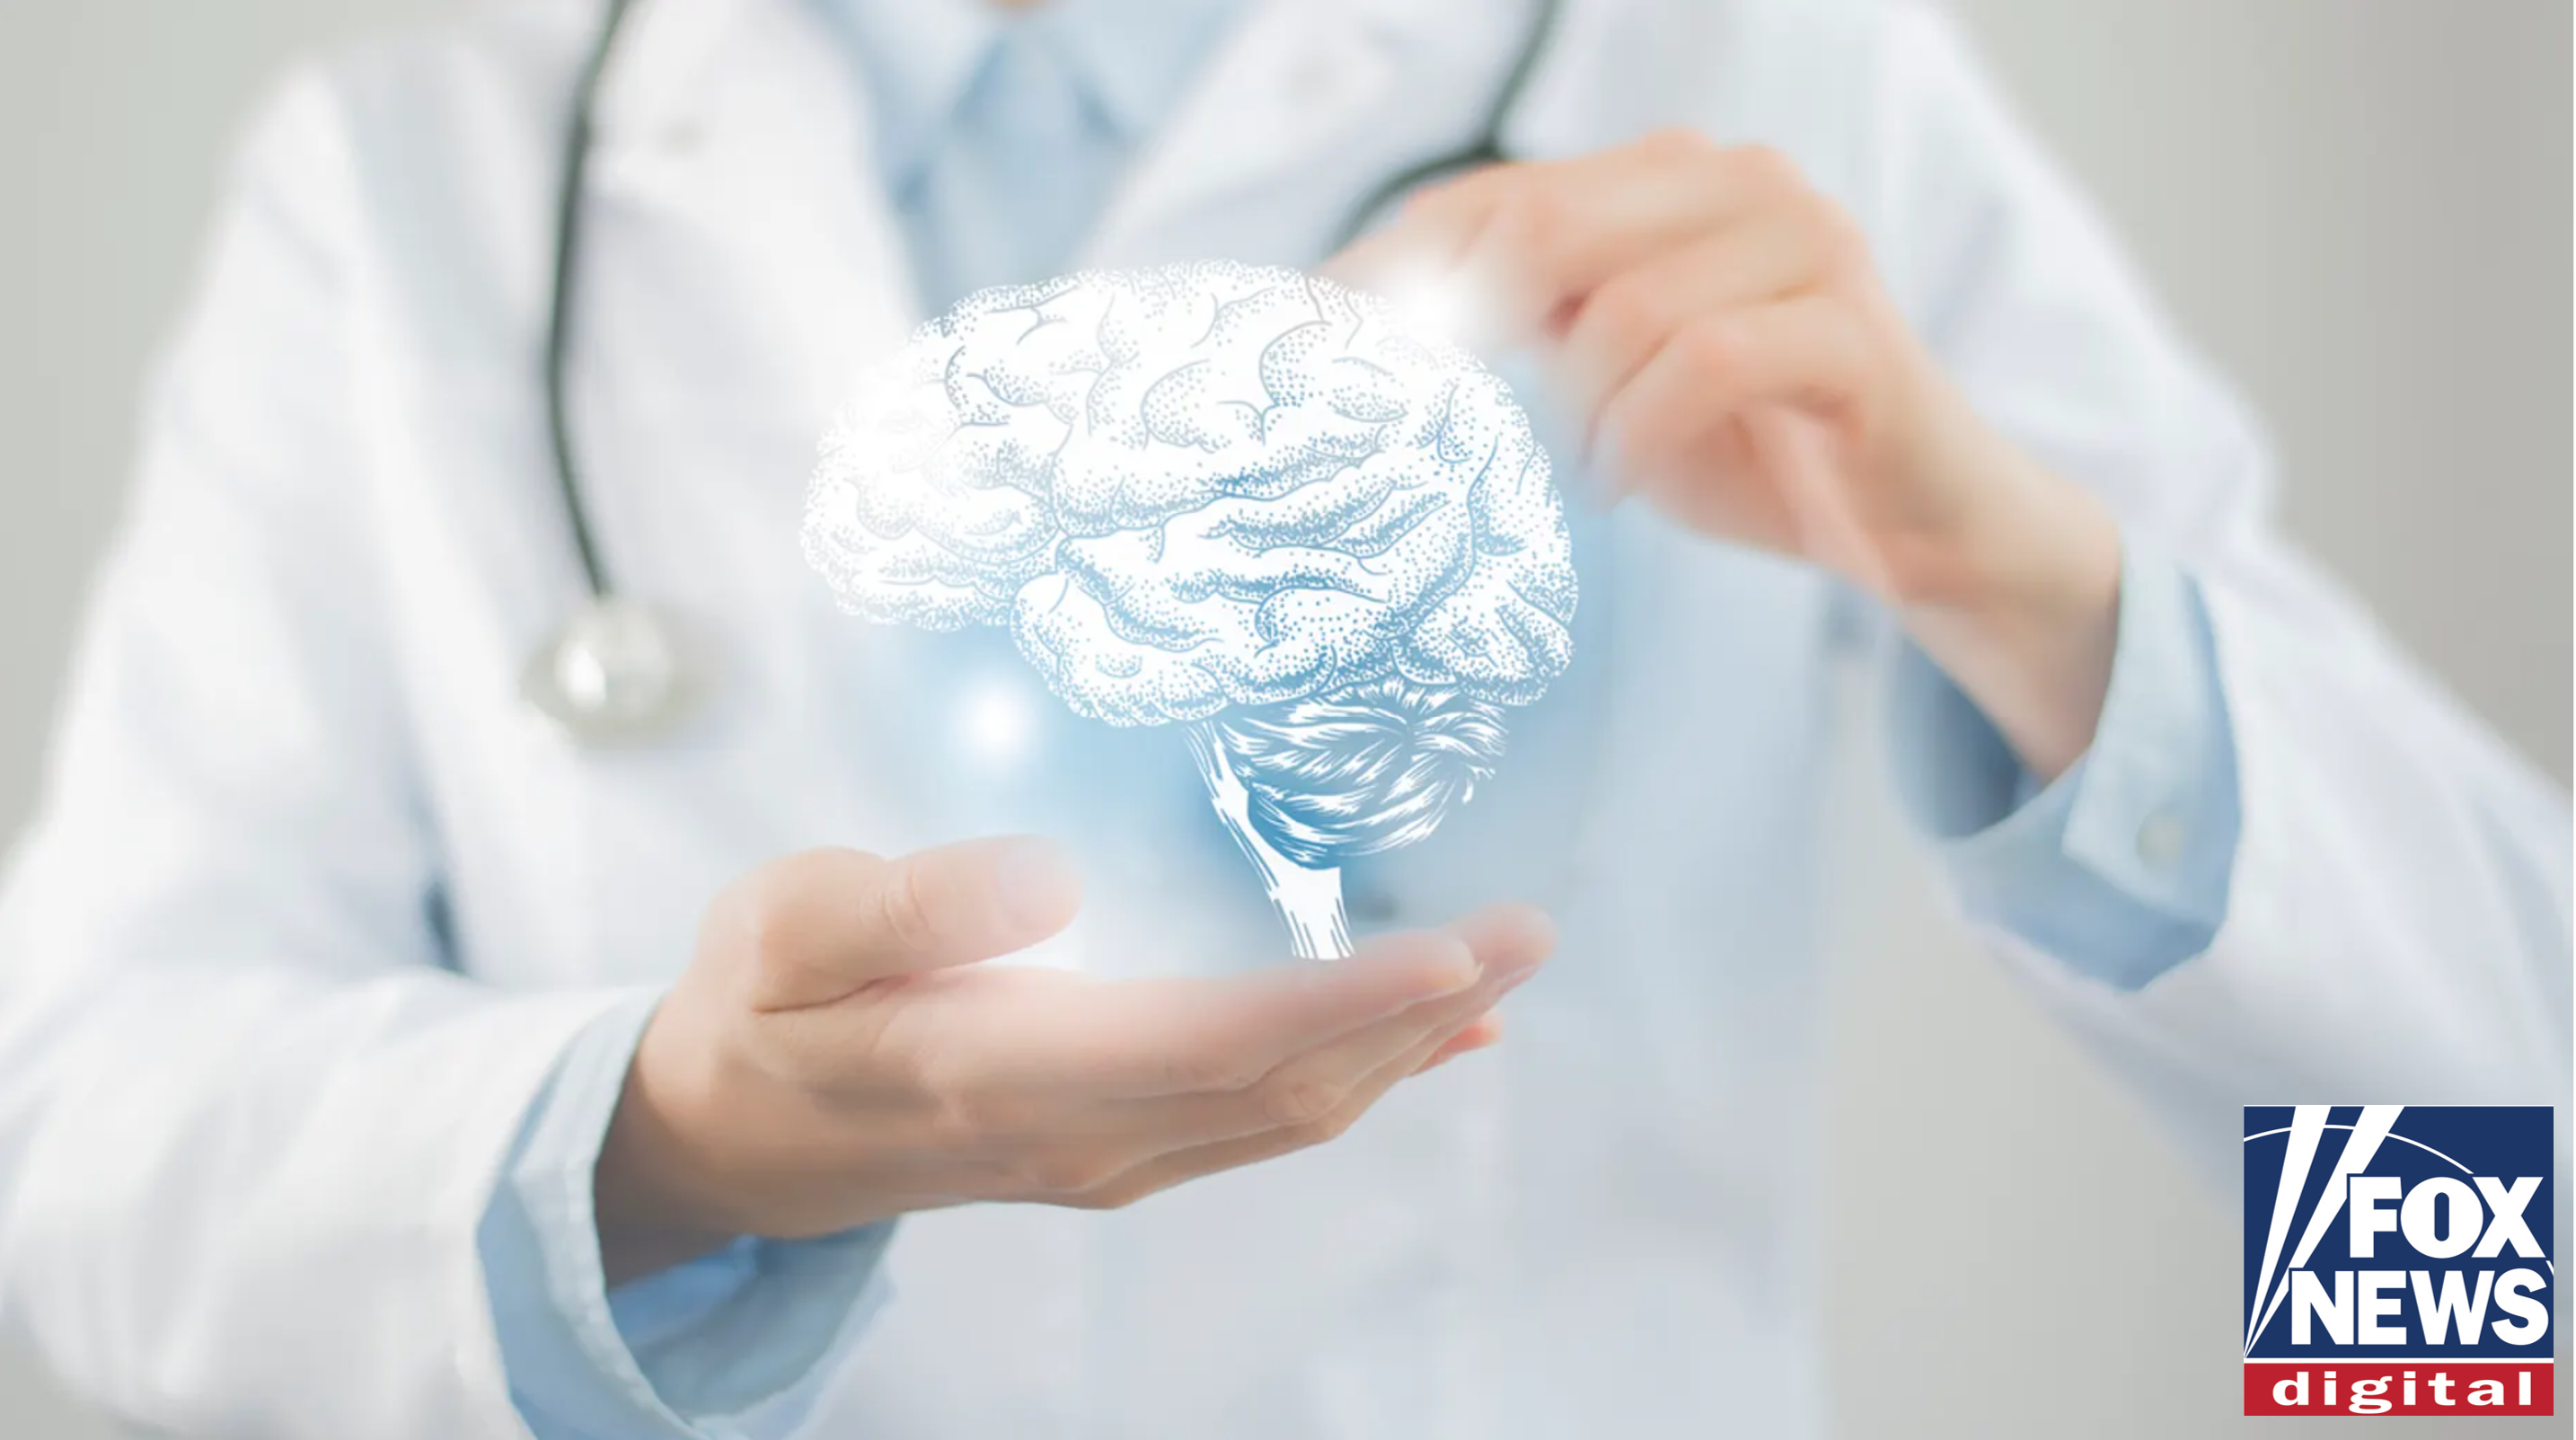 Fox News: AI tool gives doctors personalized Alzheimer’s treatment plans for dementia patients